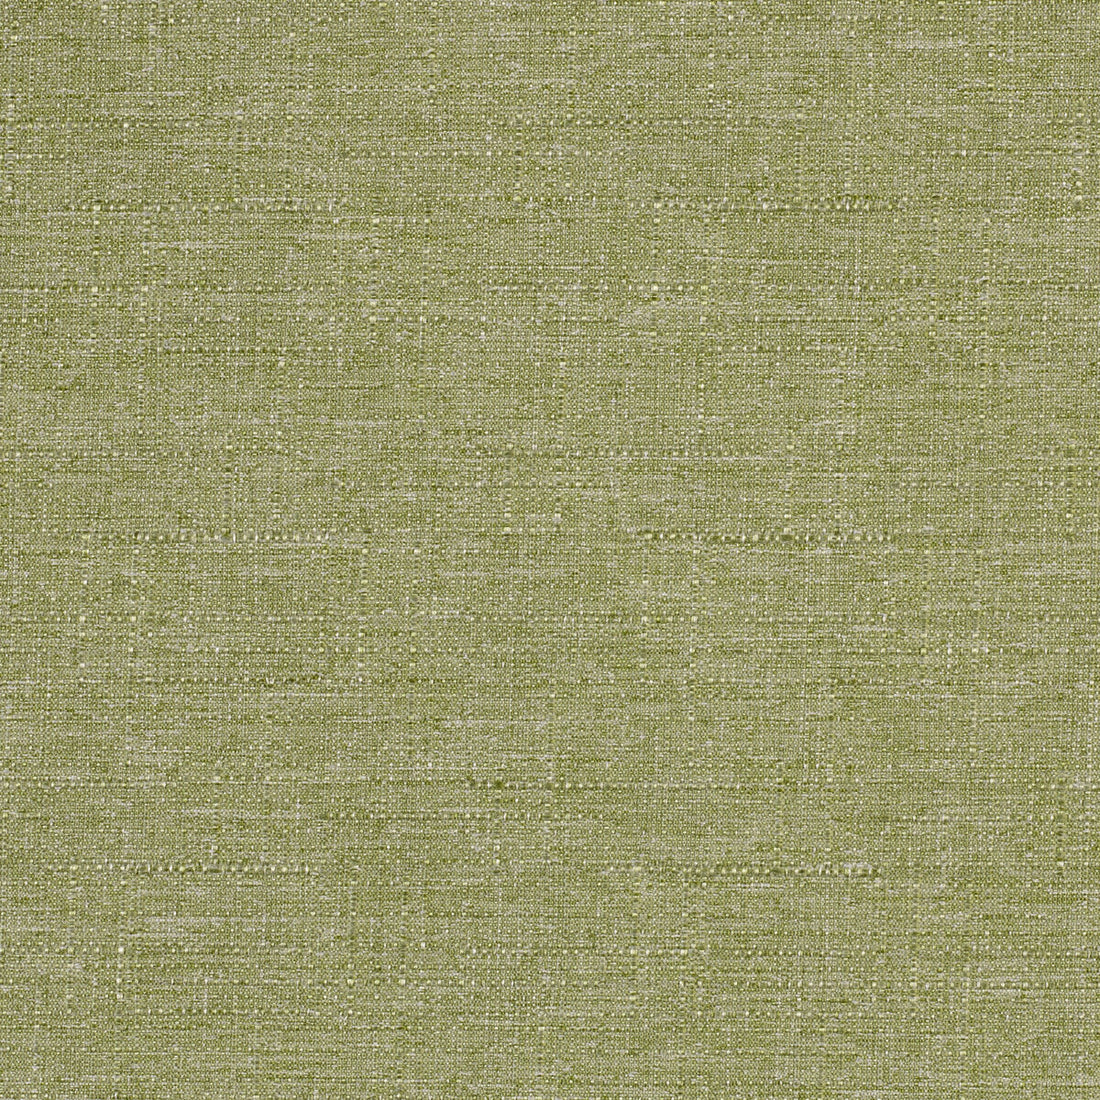 Kravet Contract fabric in 4317-30 color - pattern 4317.30.0 - by Kravet Contract